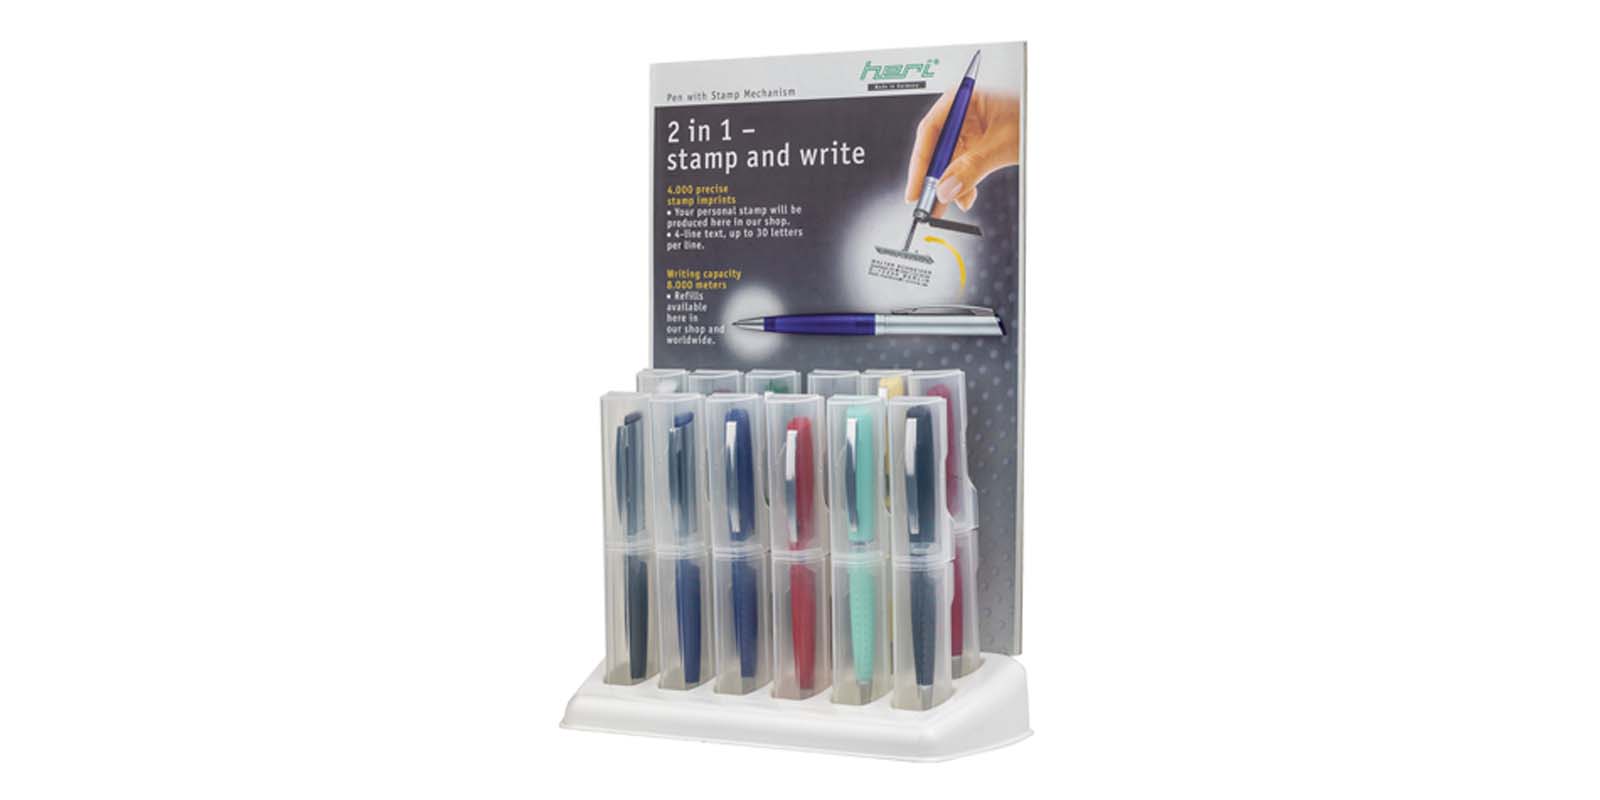 Counter Display – for 12 stamping pens in case E15